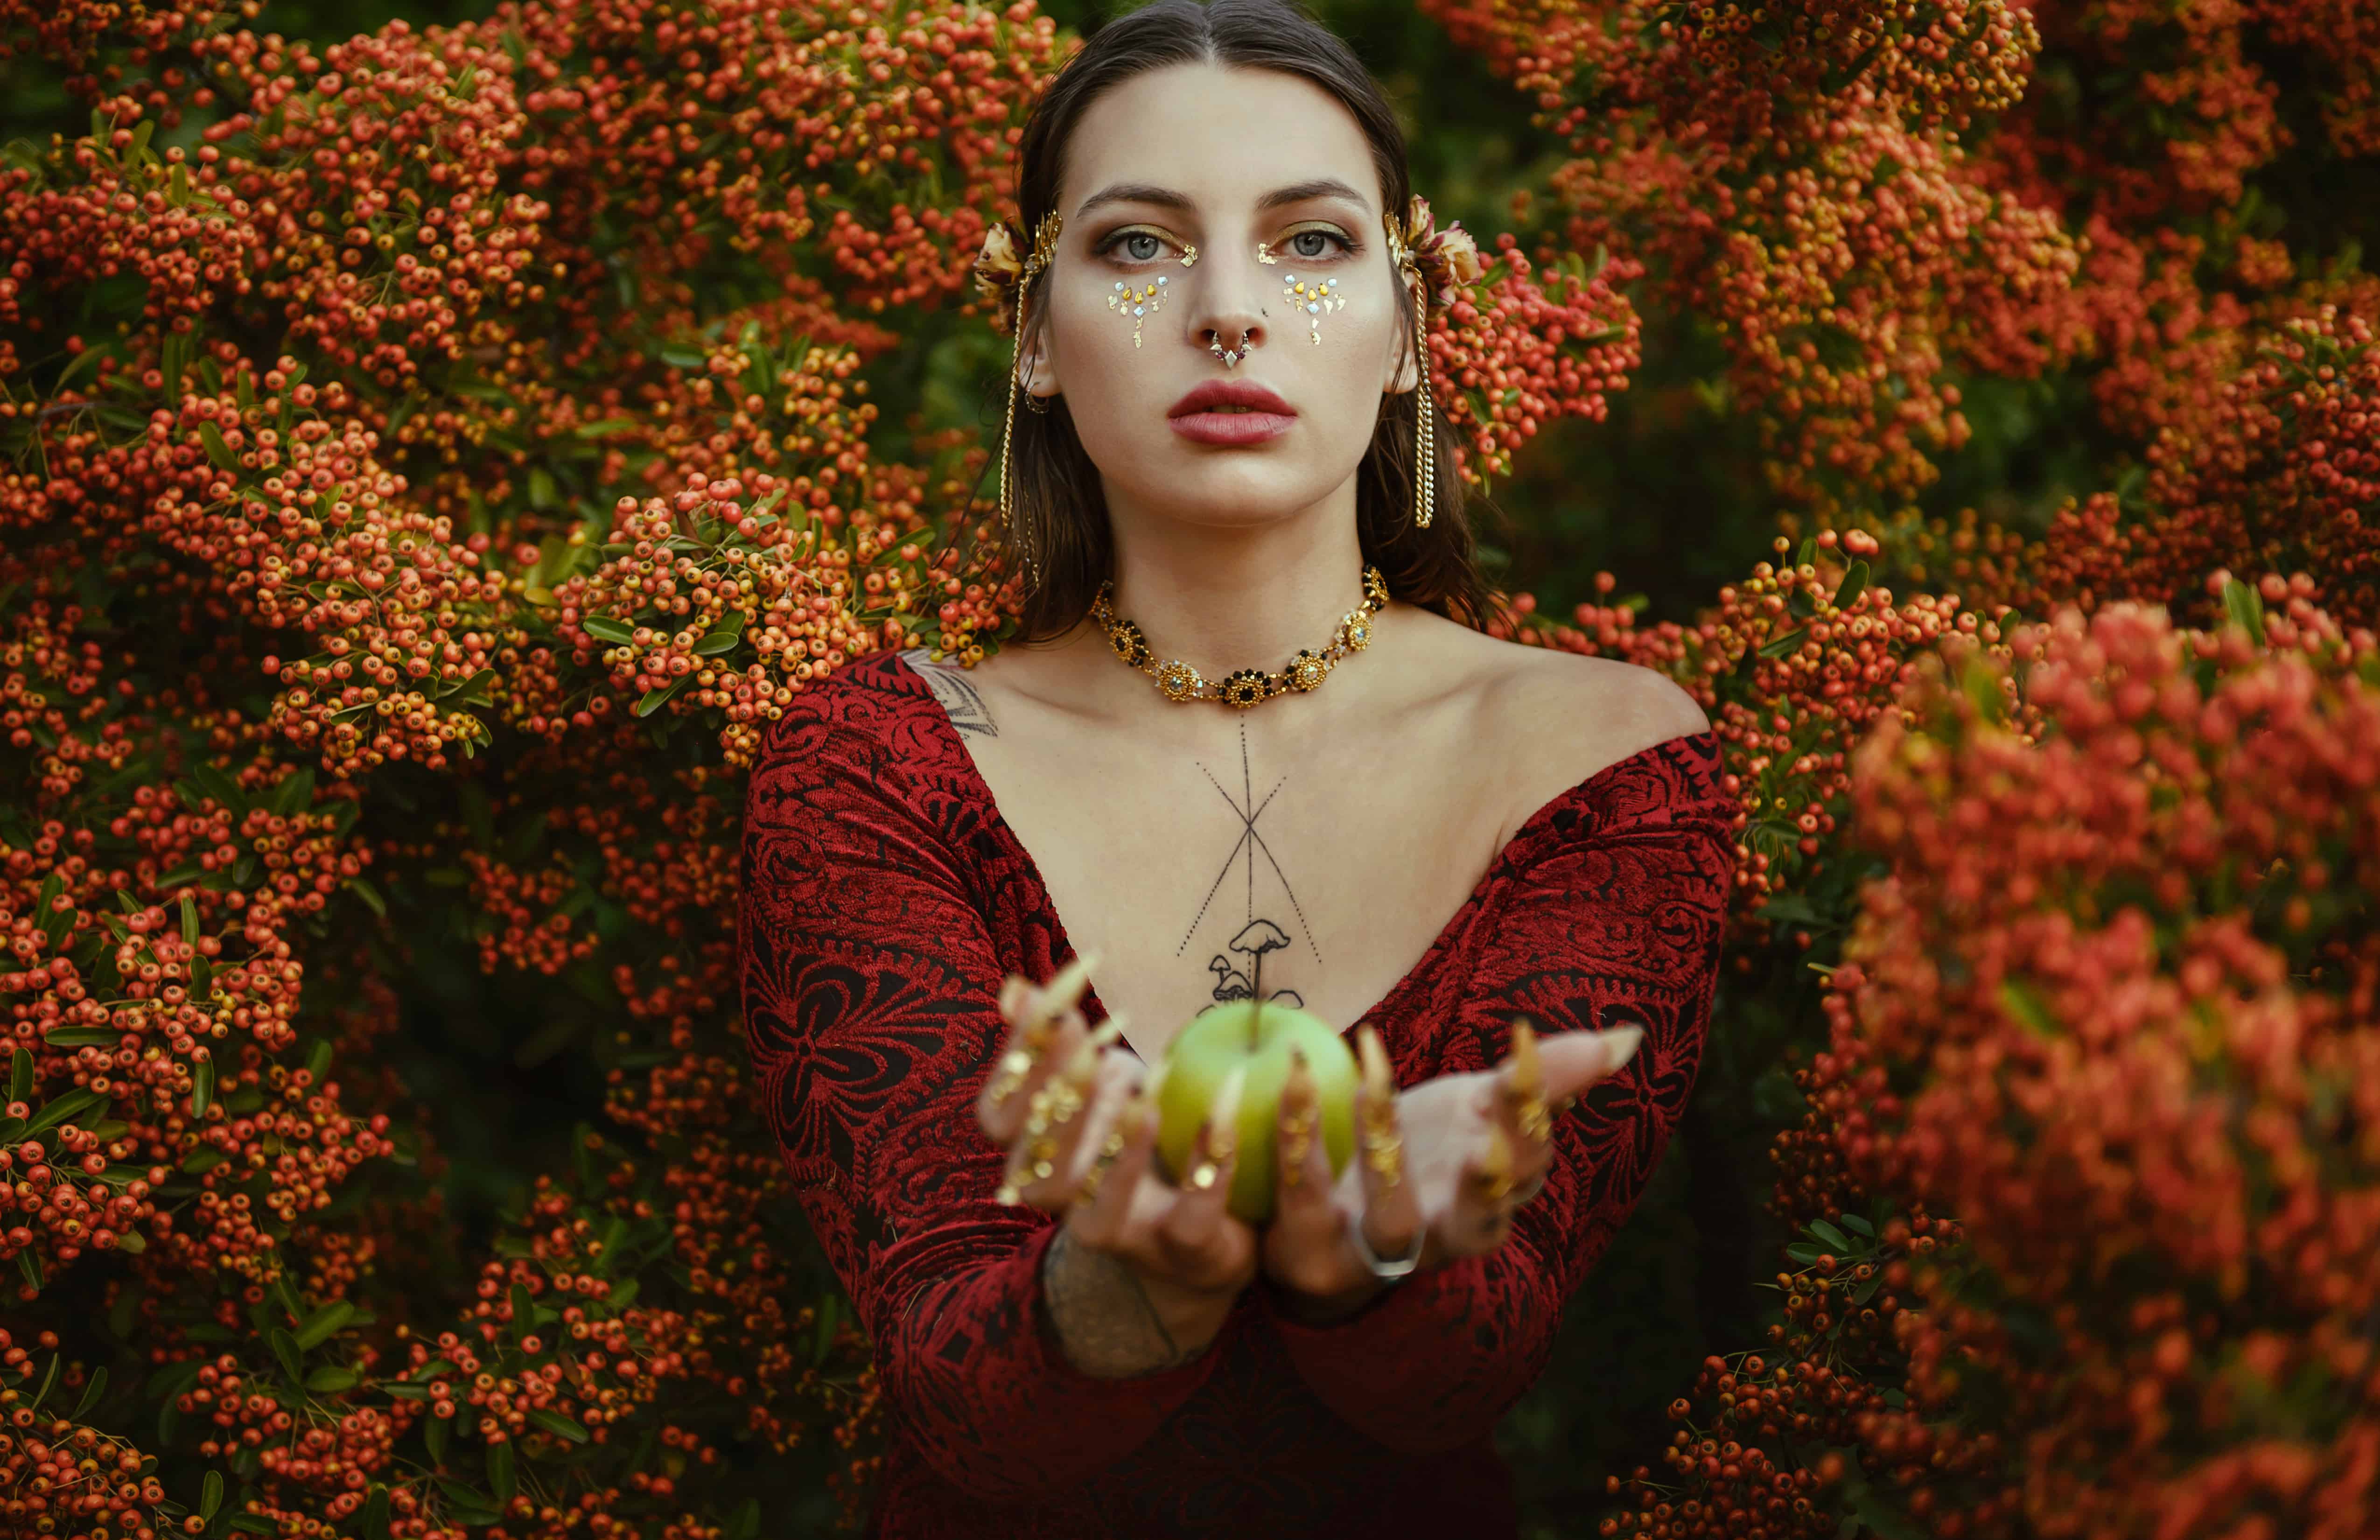 Snow White, young female with witchy vibes surrounded by red berries, is giving menacing glances